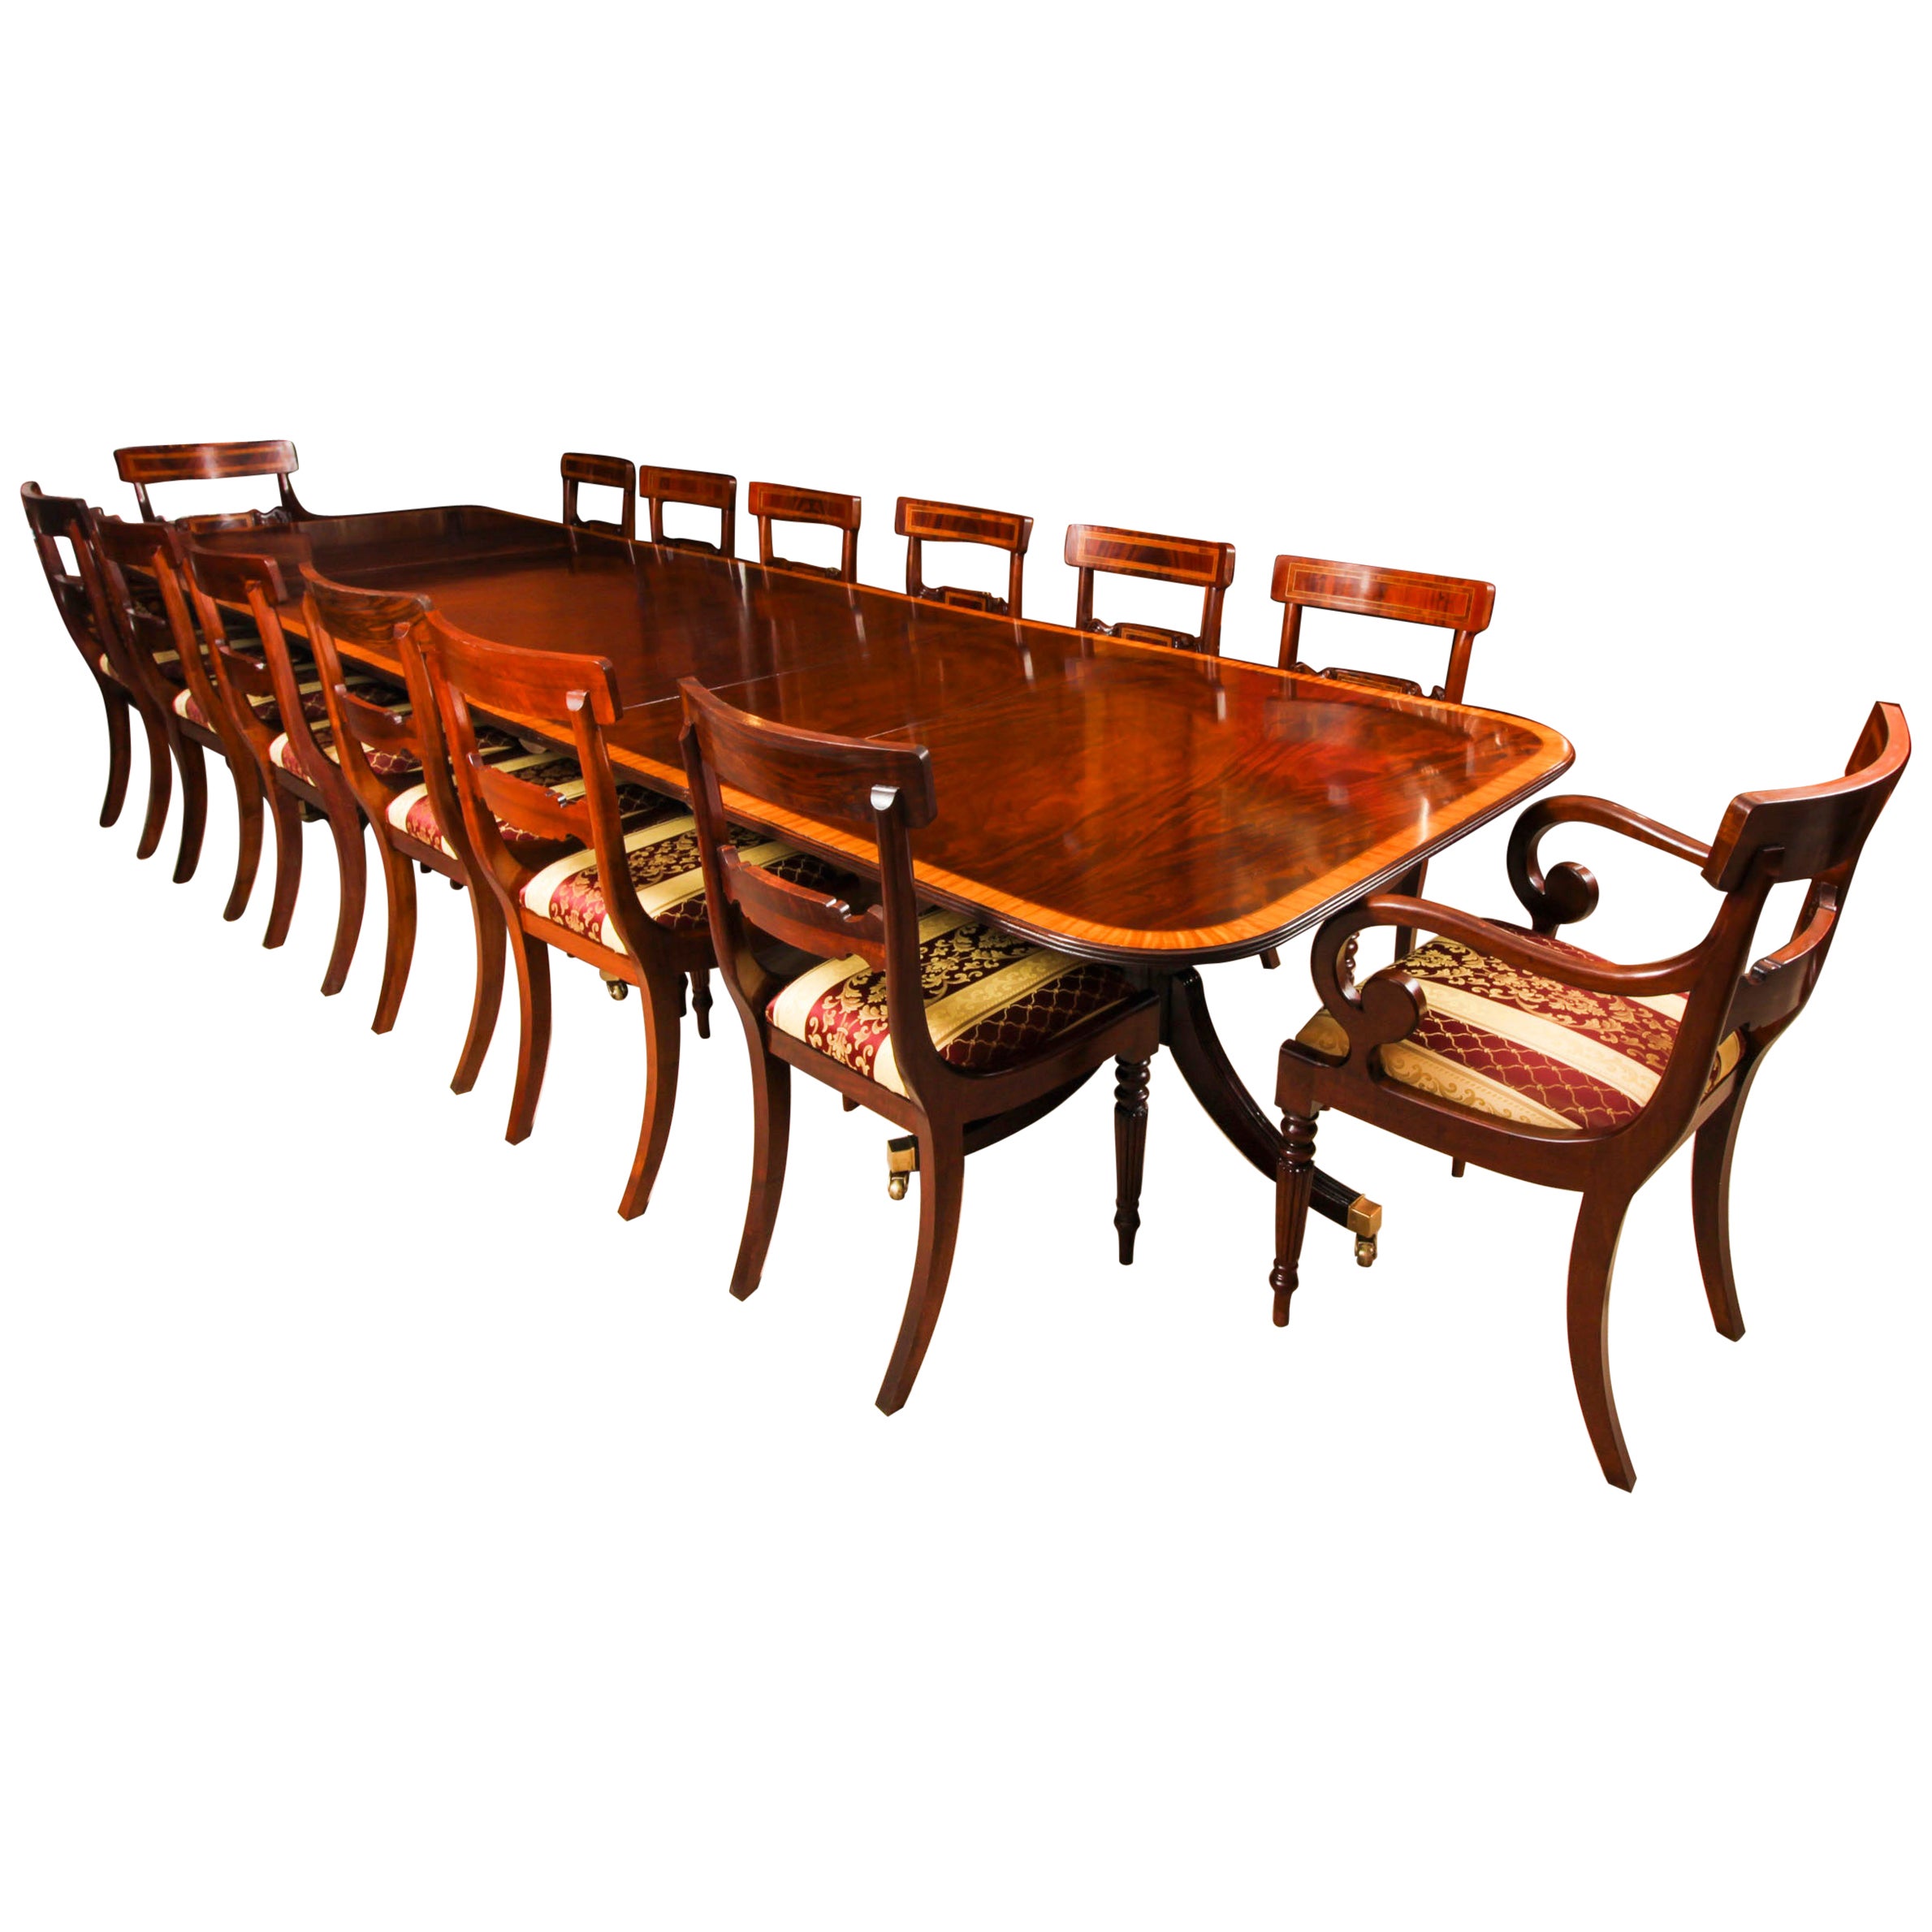 Vintage 13ft Three Pillar Mahogany Dining Table with 14 Chairs 20th C